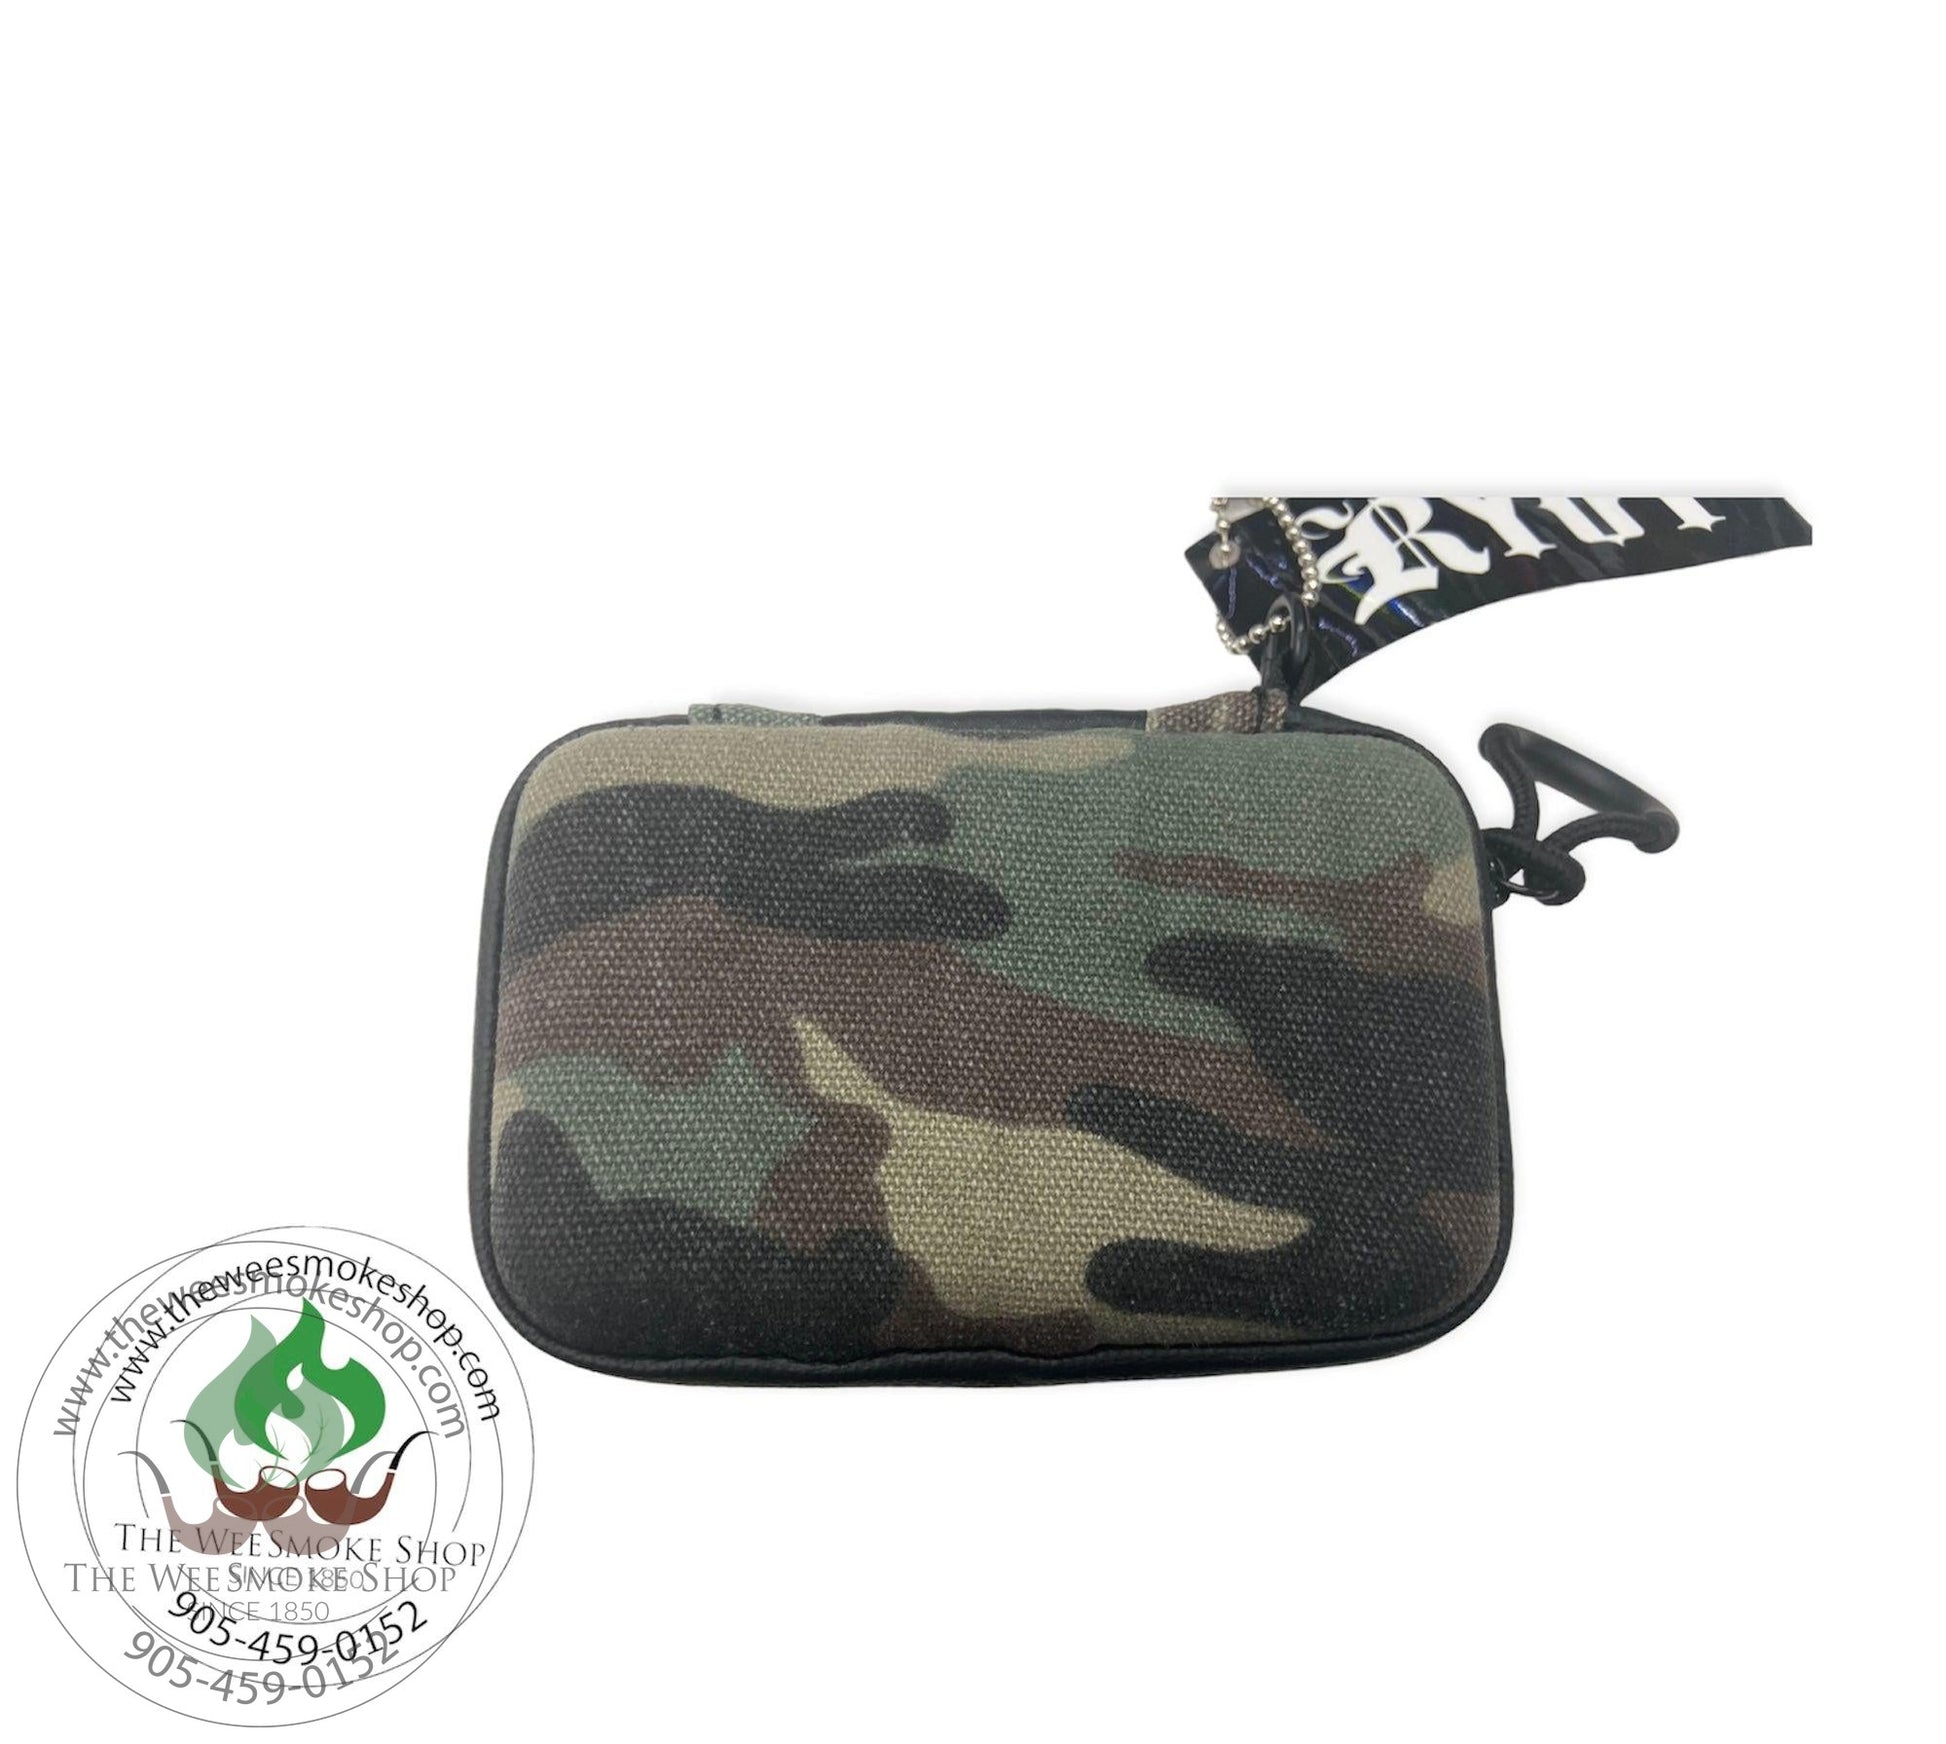 RYOT Smell Safe Carbon Case camo - storage - the wee smoke shop